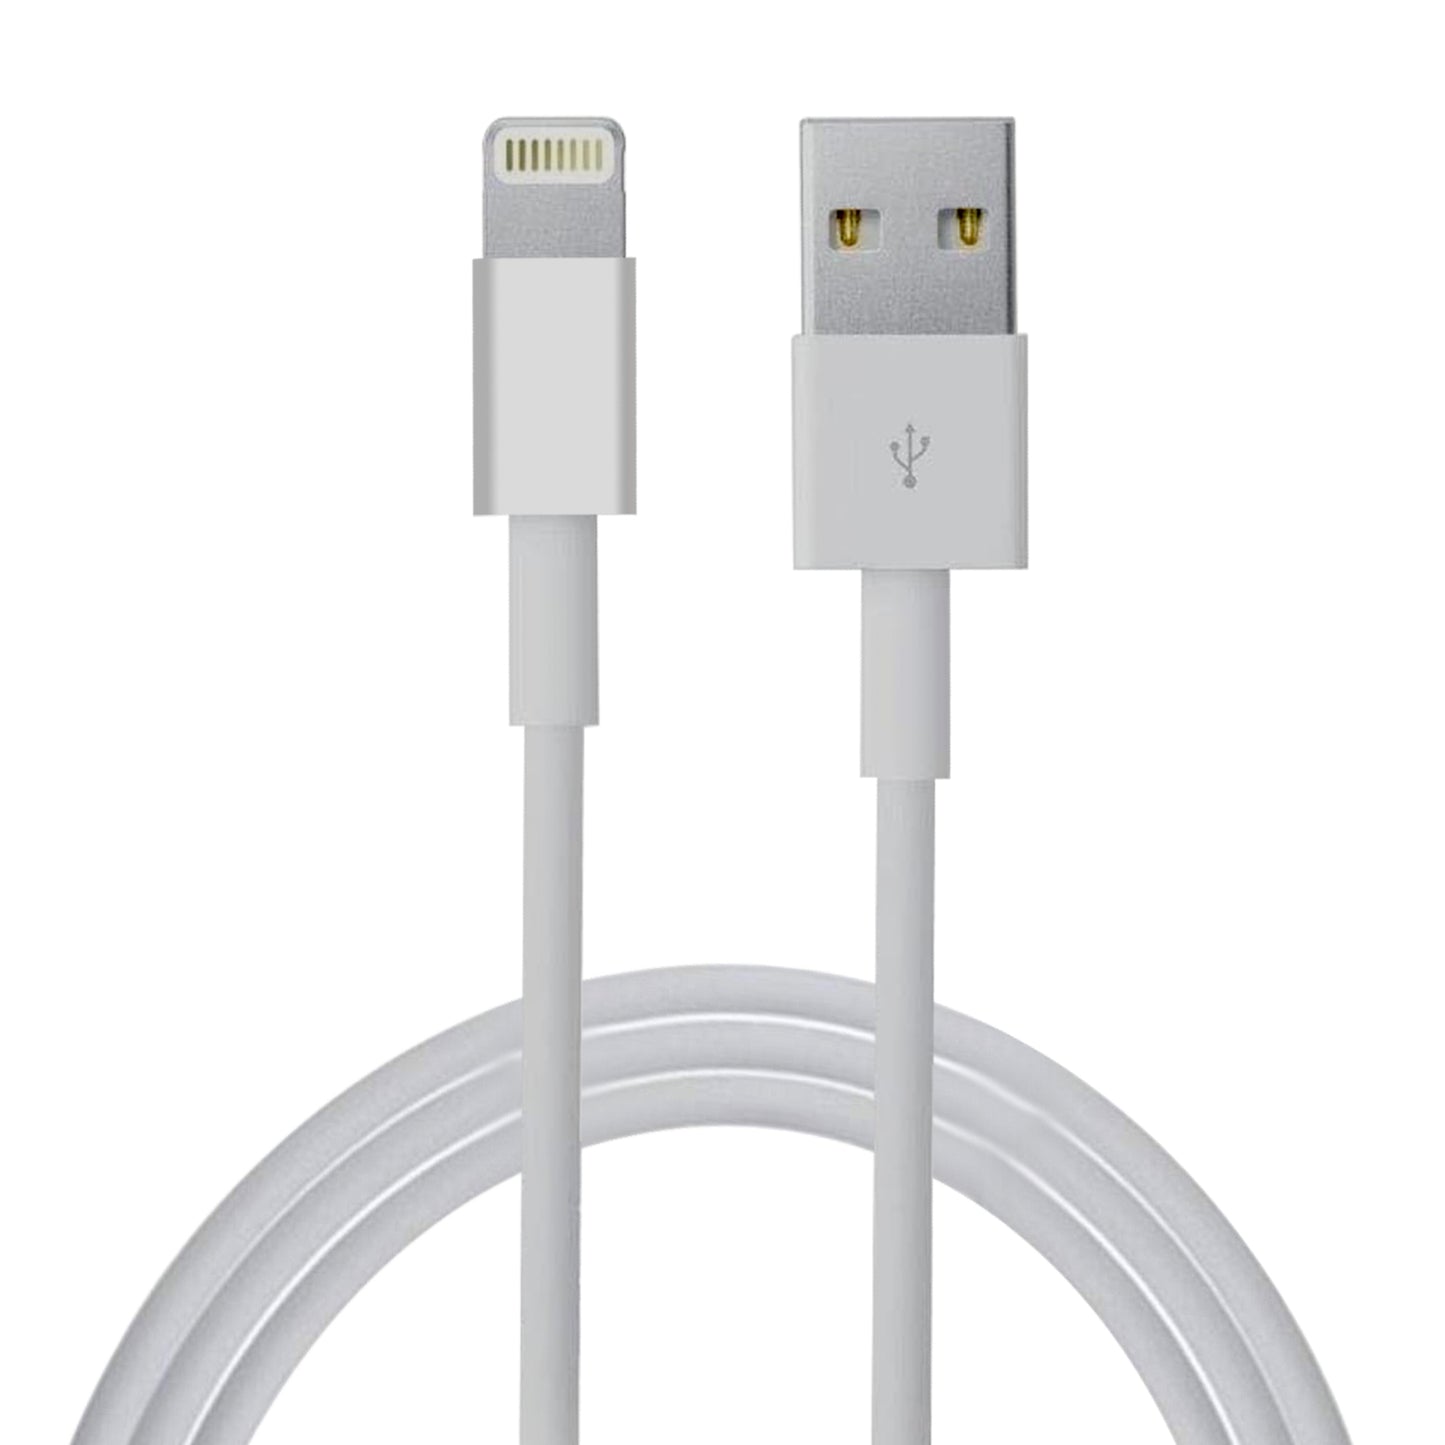 WRADER Lightning Cable 1 m iphone Fast Charging Lightning Port Cable for IPads, IPod, IPhone